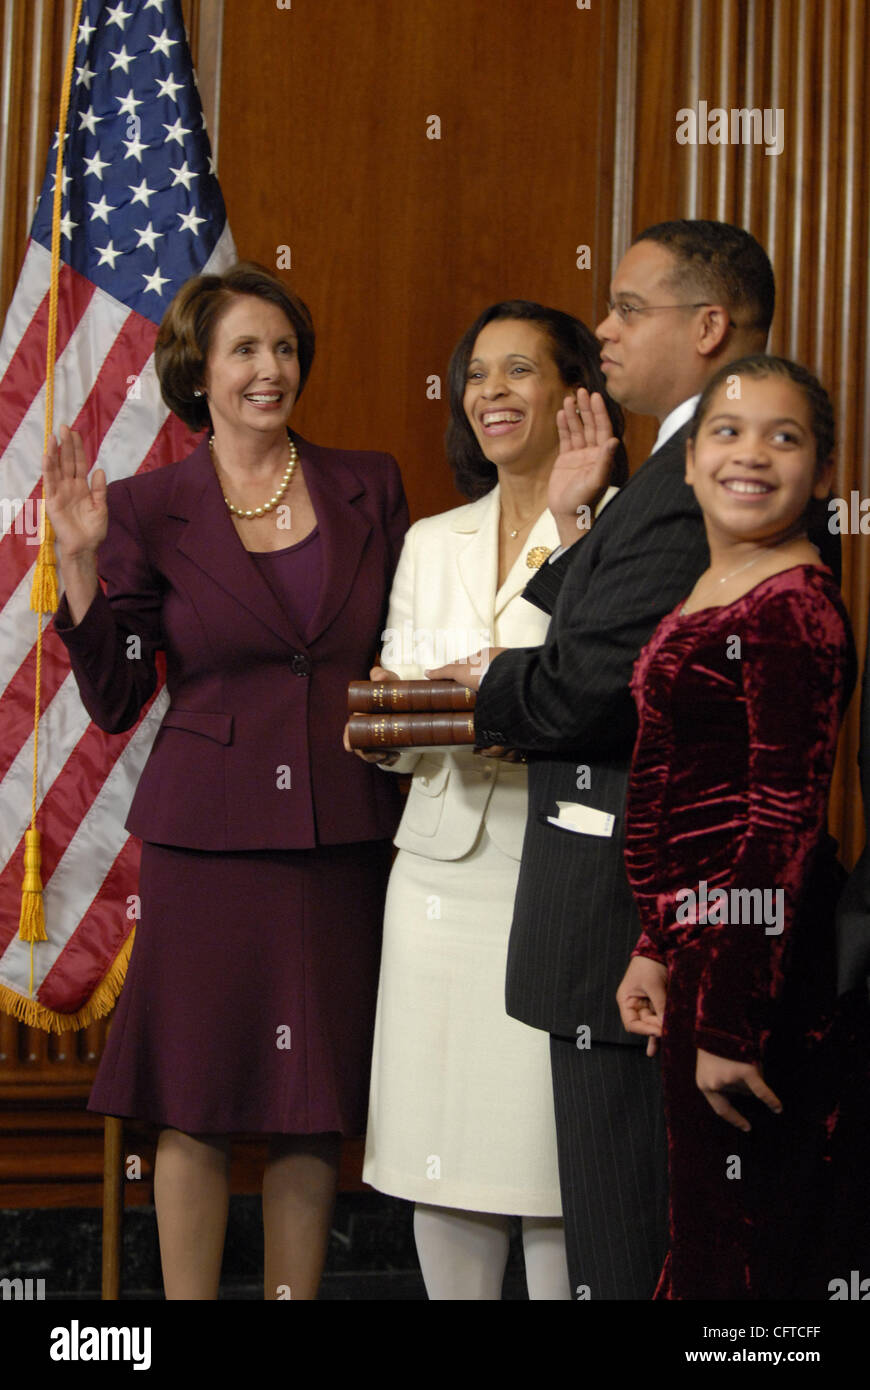 Jan 04, 2007 - Washington, DC, USA - KEITH ELLISON, the first Muslim to serve in the United States Congress, is sworn into office by Speaker of the House NANCY PELOSI. Ellison's family joined him for his swearing in ceremony. Stock Photo